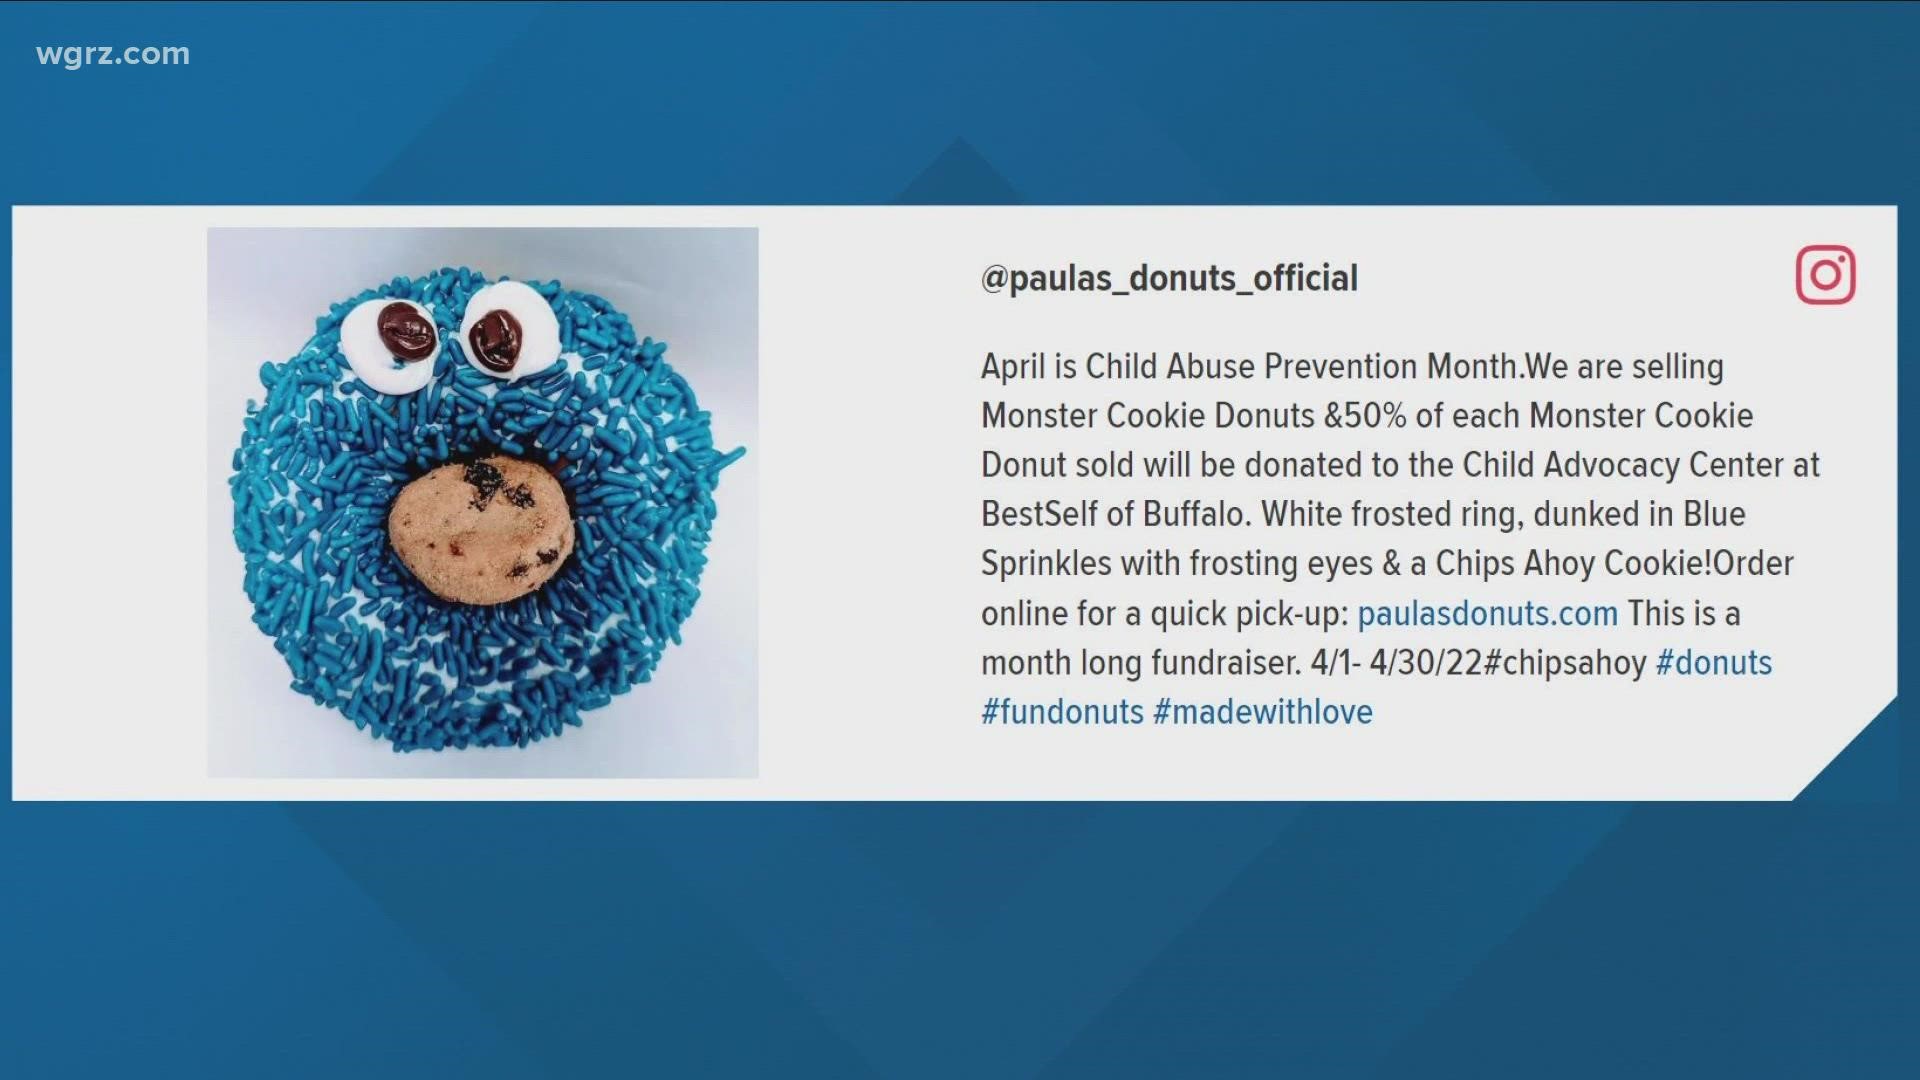 Paula's Donuts is selling a special donut for Child Abuse Prevention Month.